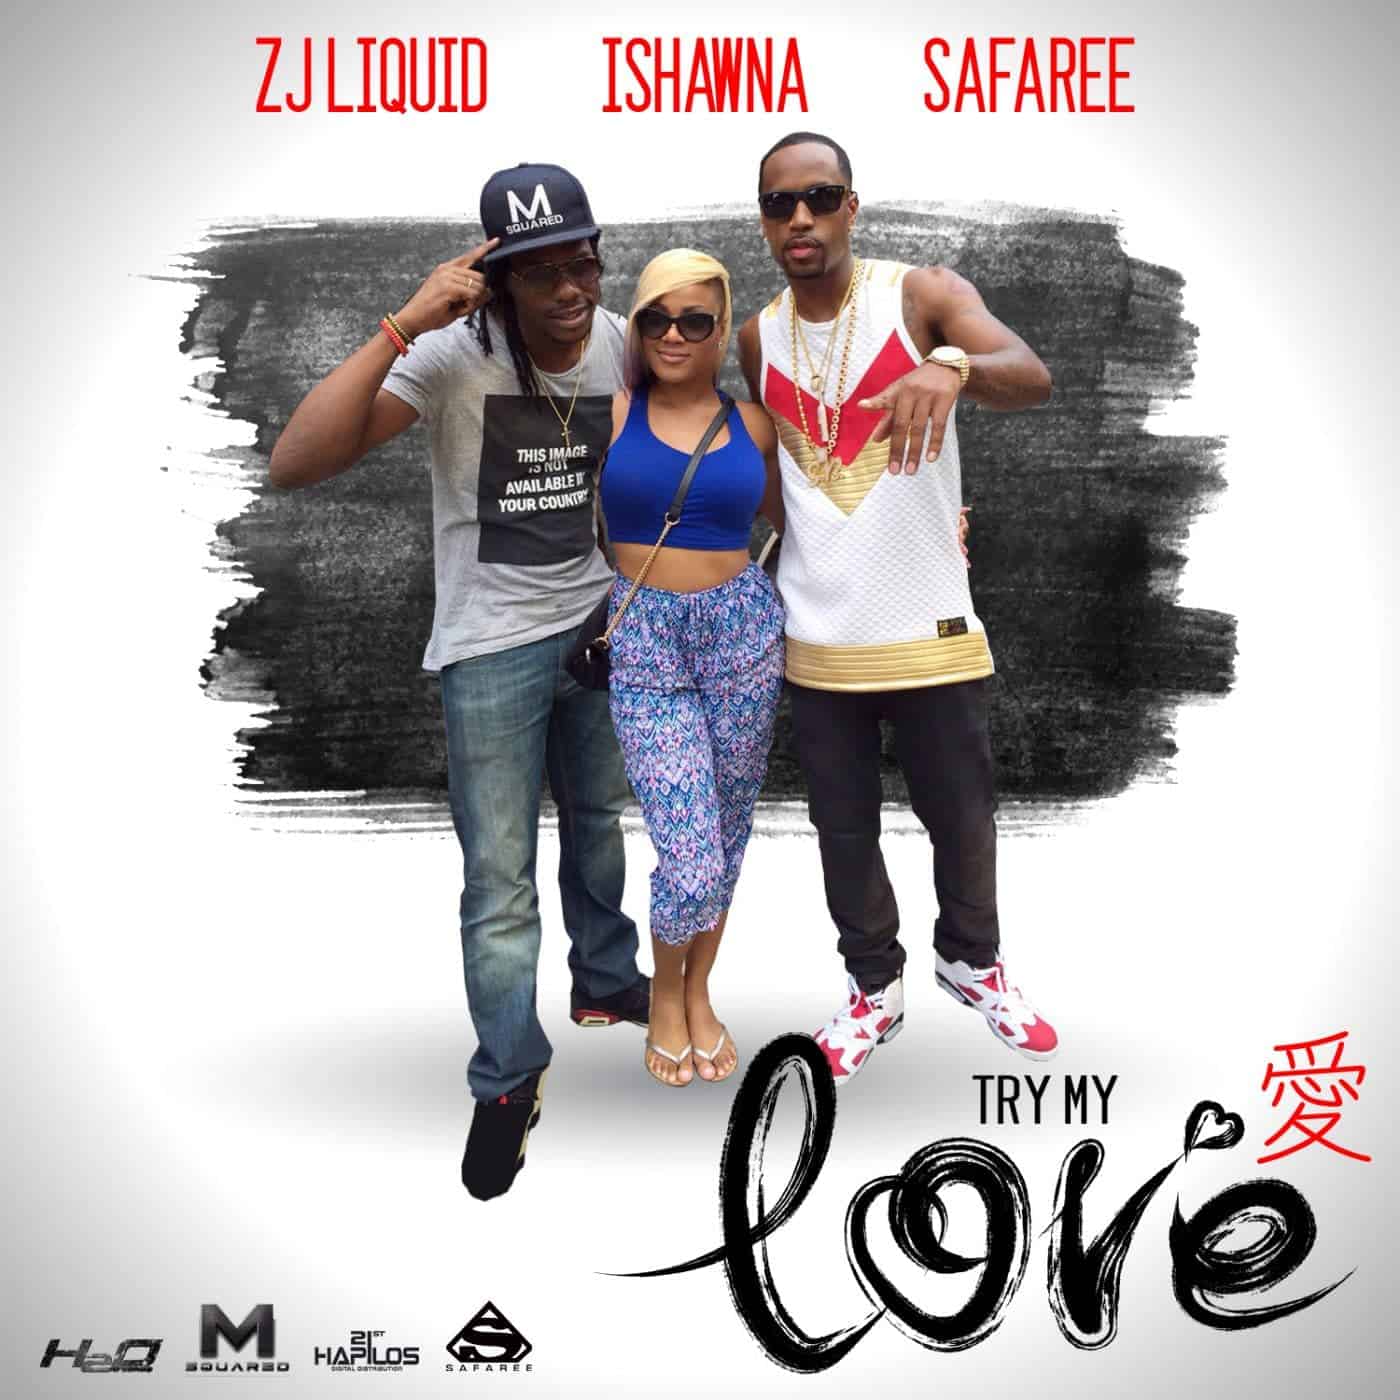 Ishawna & Safaree "Try My Love"(Raw & Clean) Produced by H2o Productions